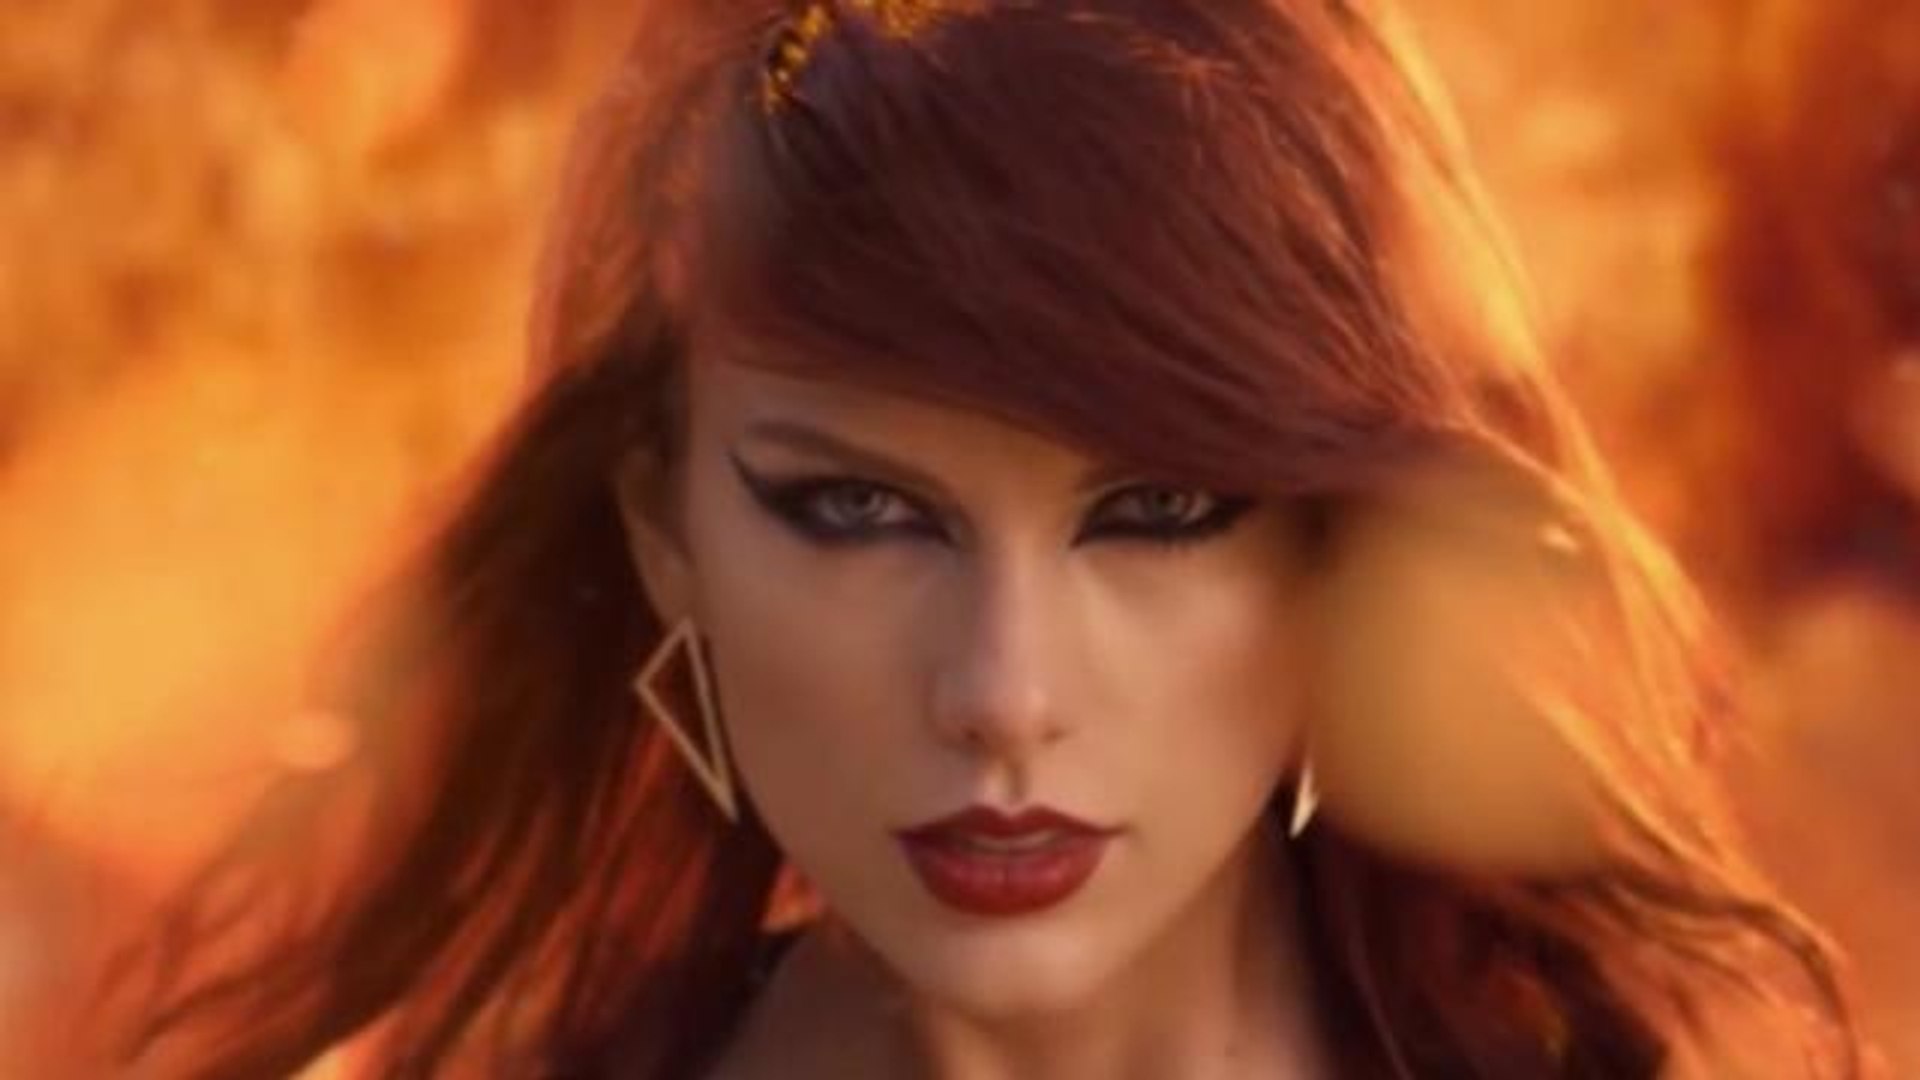 Taylor Swift's 'Bad Blood' video breaks Vevo one-day record